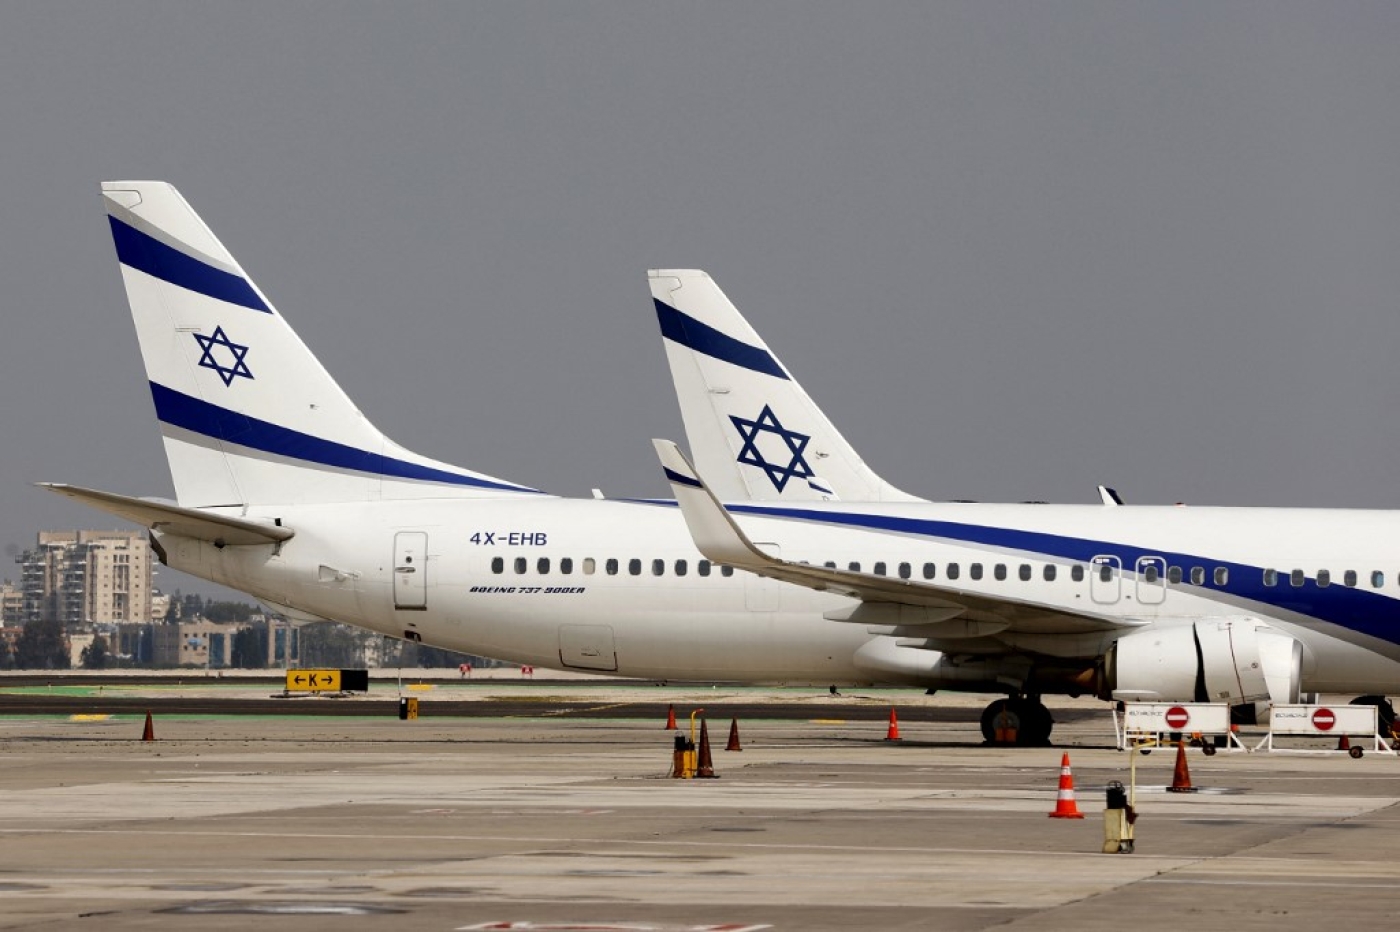 A file photo taken on 20 February 2022 shows Israeli Airlines El Al Boeing 737 planes on the tarmac in Israel's Ben Gurion International airport in Lod, on the outskirts of Tel Aviv (AFP)